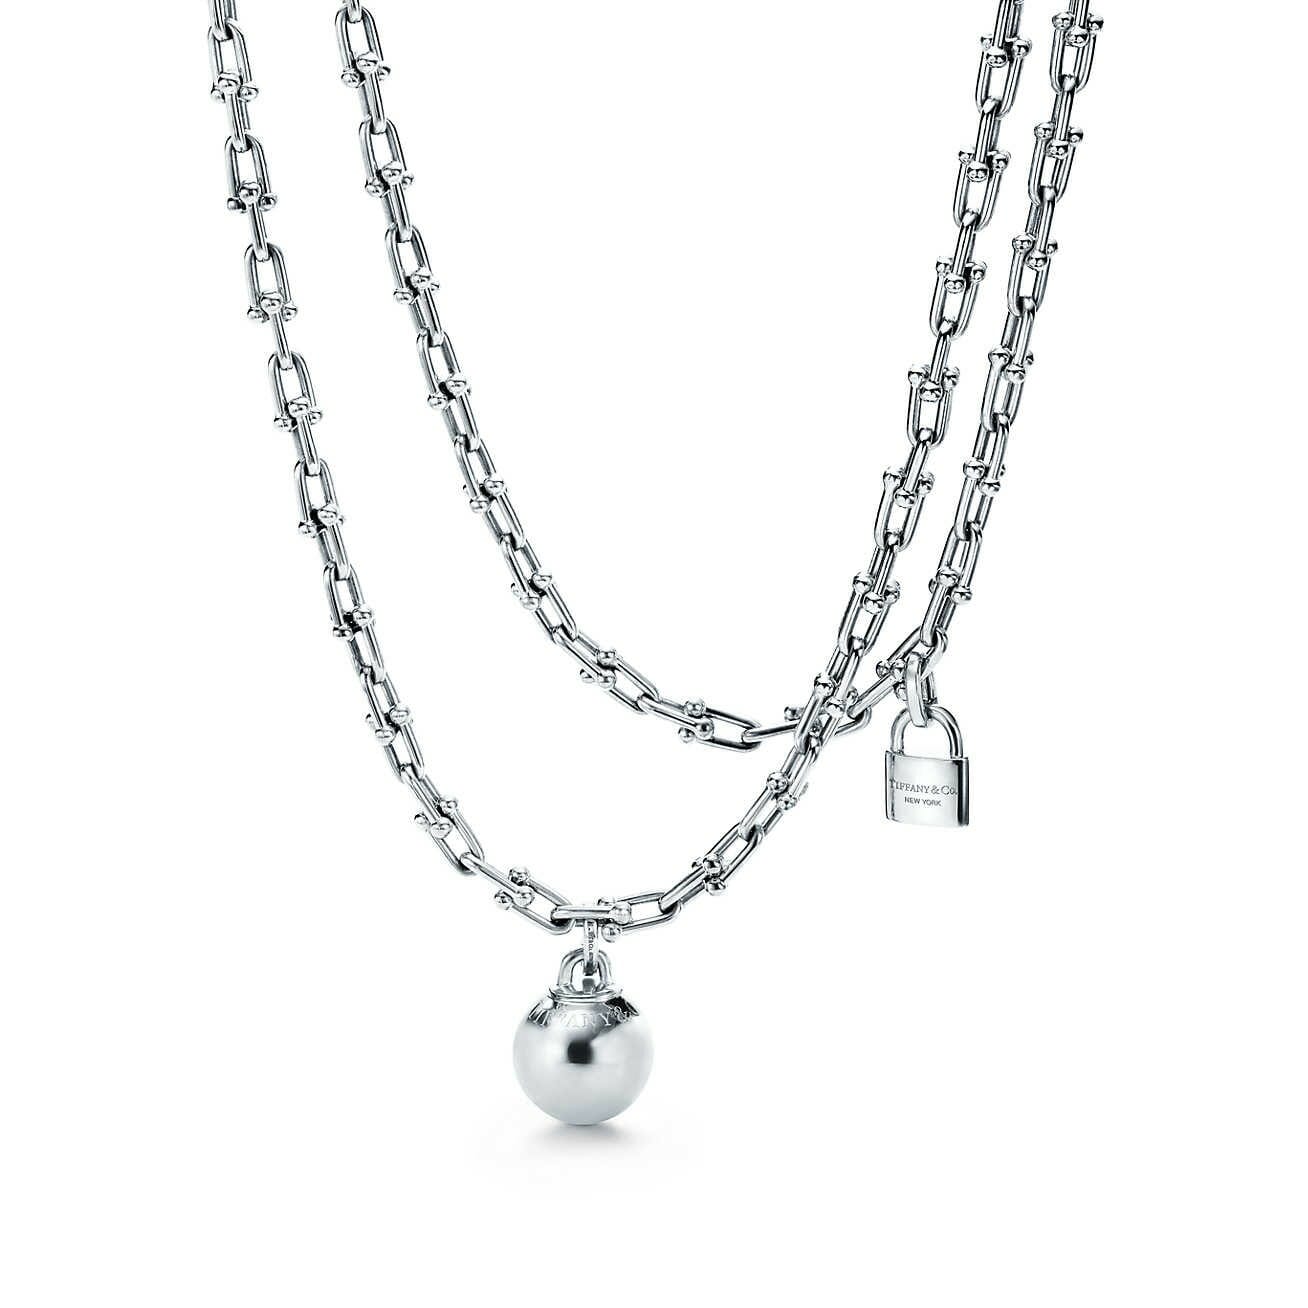 Mothers Day Gift ideas from Newport Living and Lifestyles Tiffany & Co. Tiffany HardWear wrap necklace ball and chain Wrap Necklace $2600